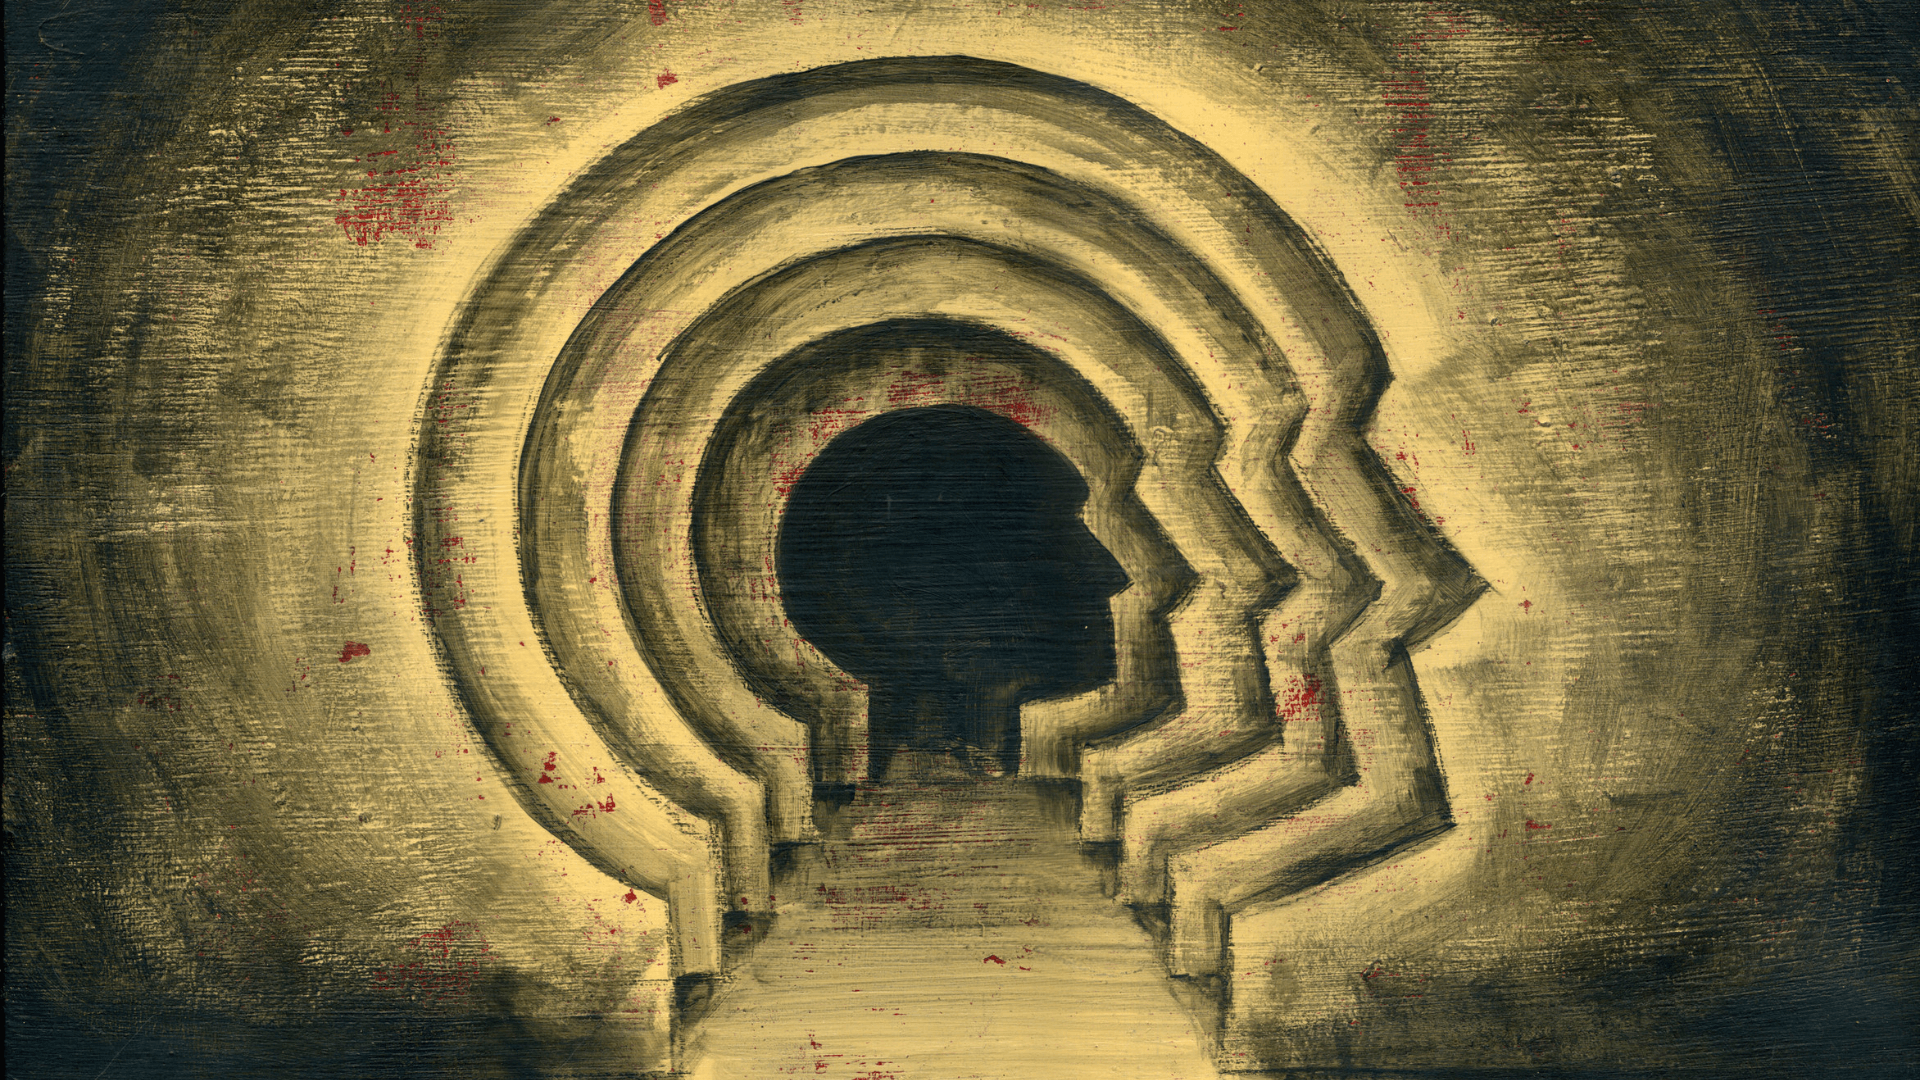 artisitic paint, with outlines of faces getting smaller and smaller in a tunnel like, yellow/black paint and background